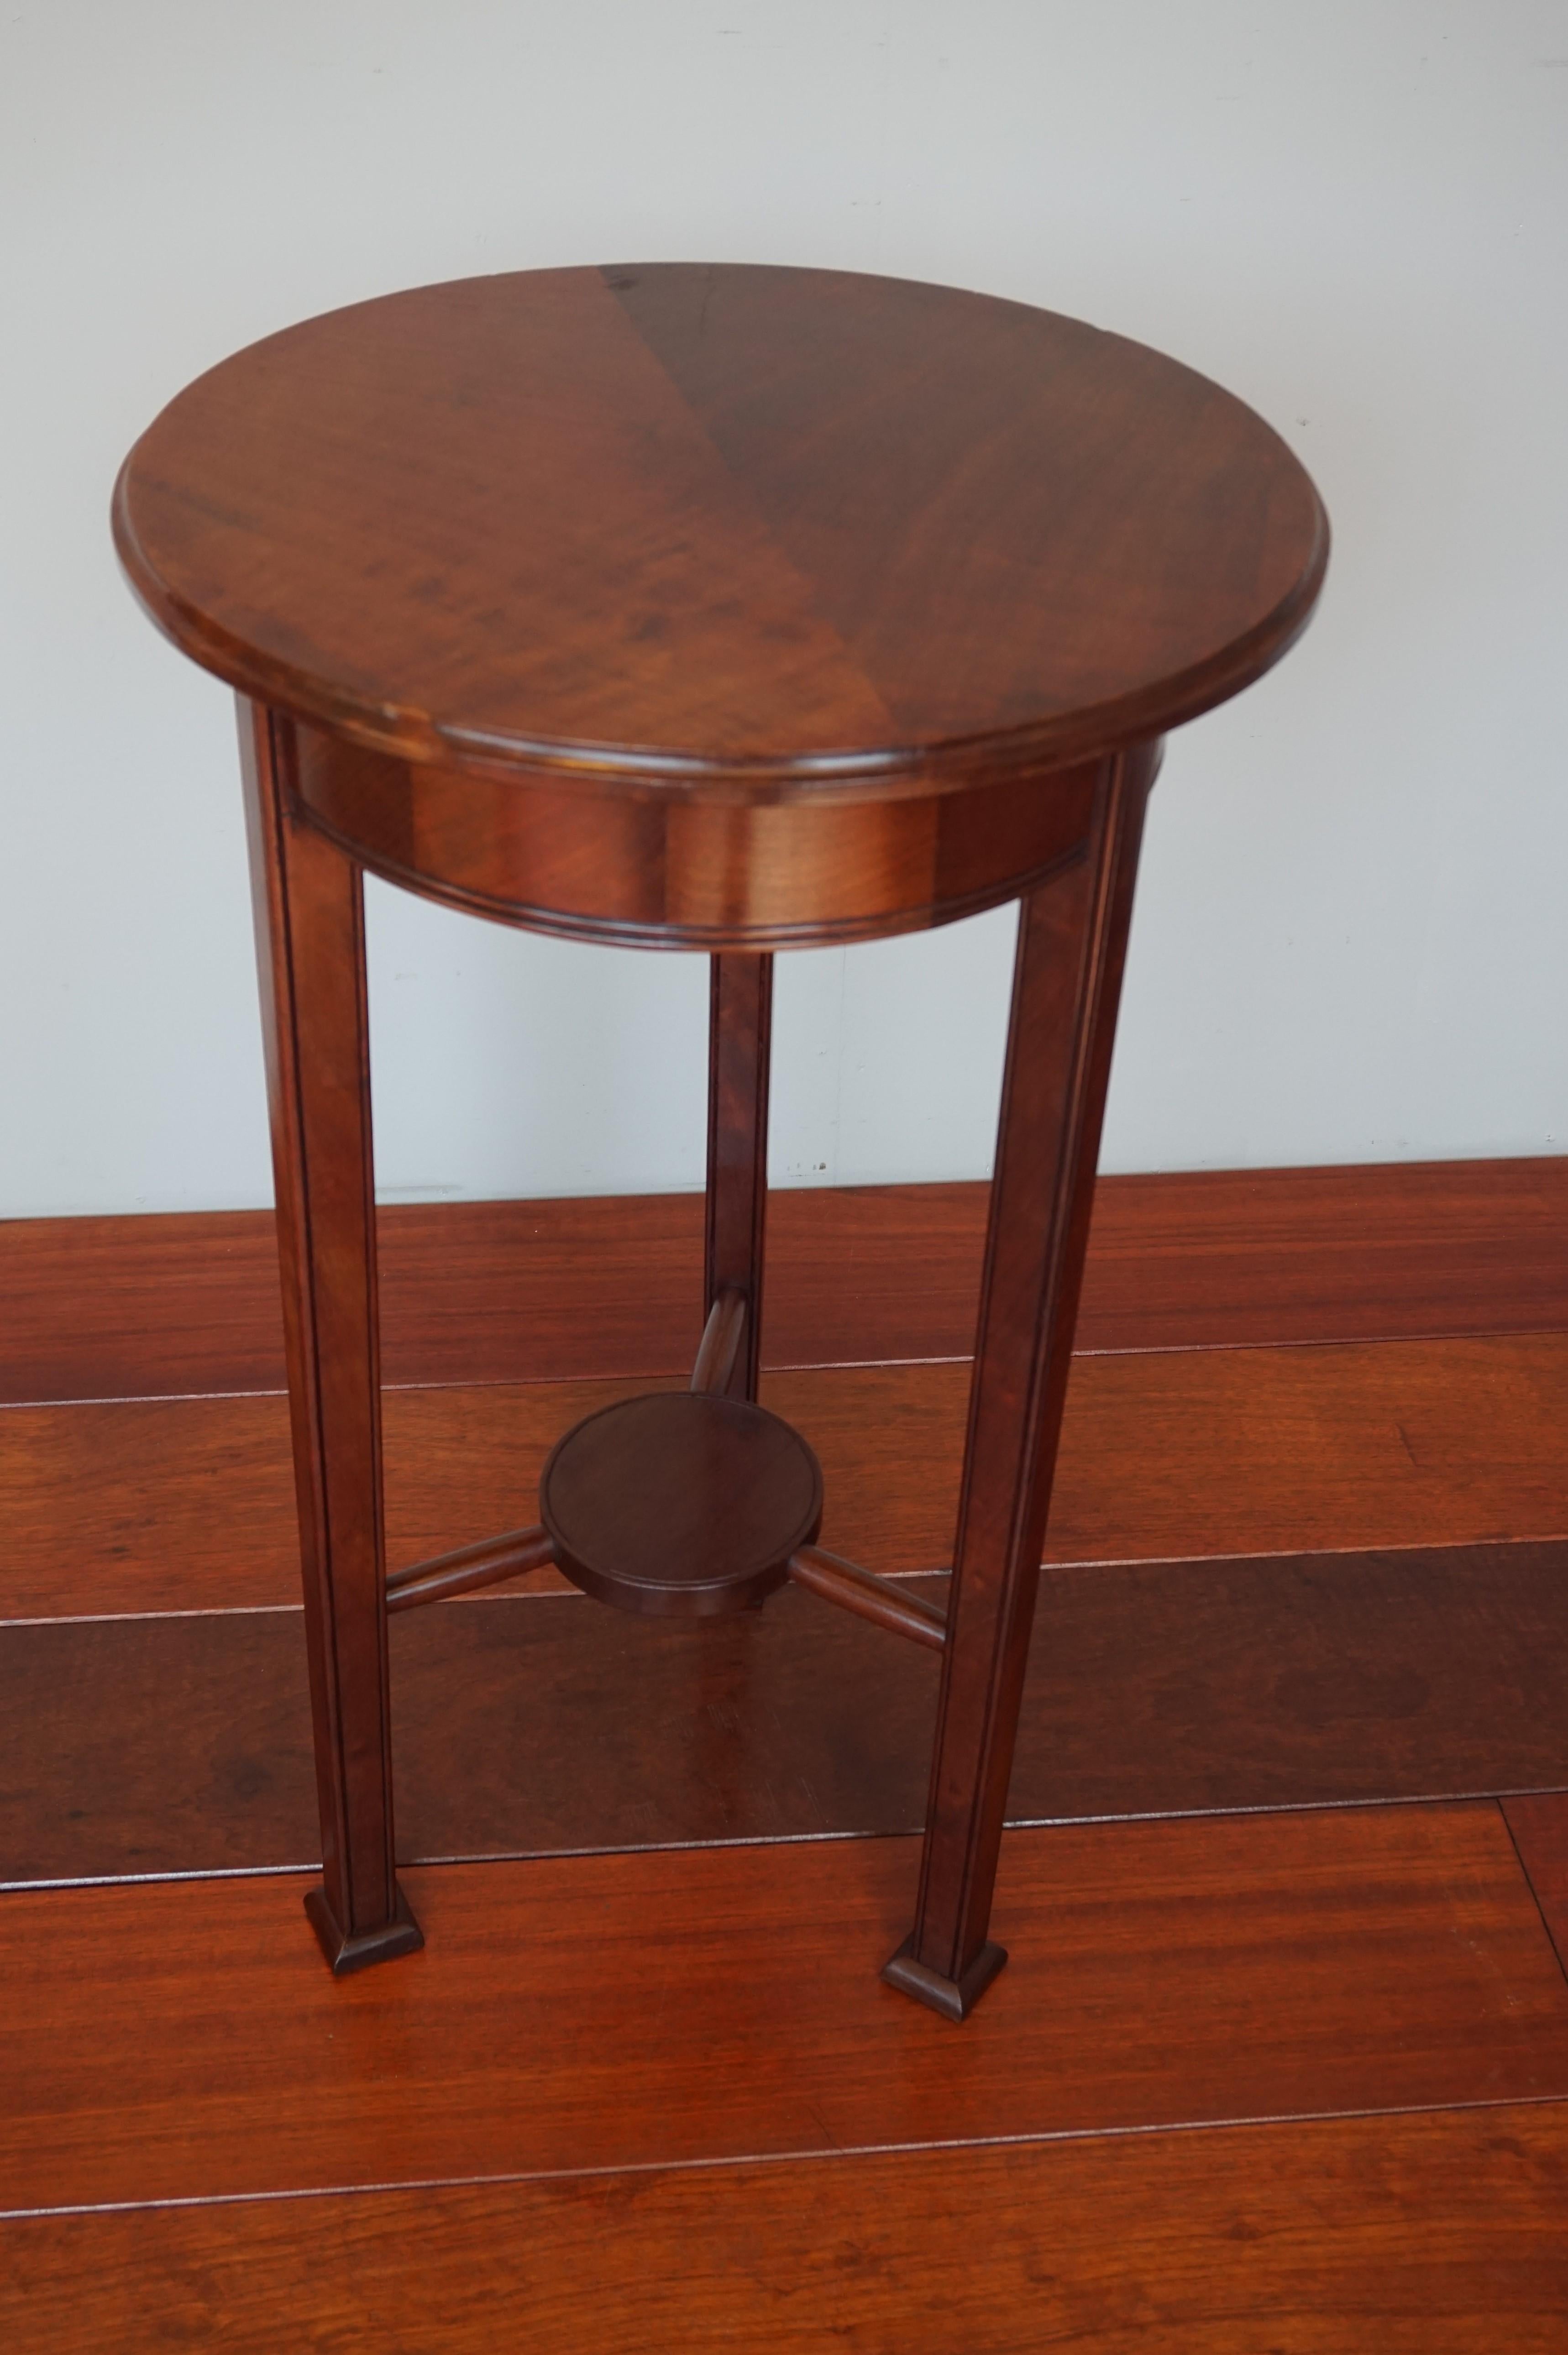 Wonderful Solid Mahogany Art Deco Pedestal Table and Sculpture Stand circa 1920 5